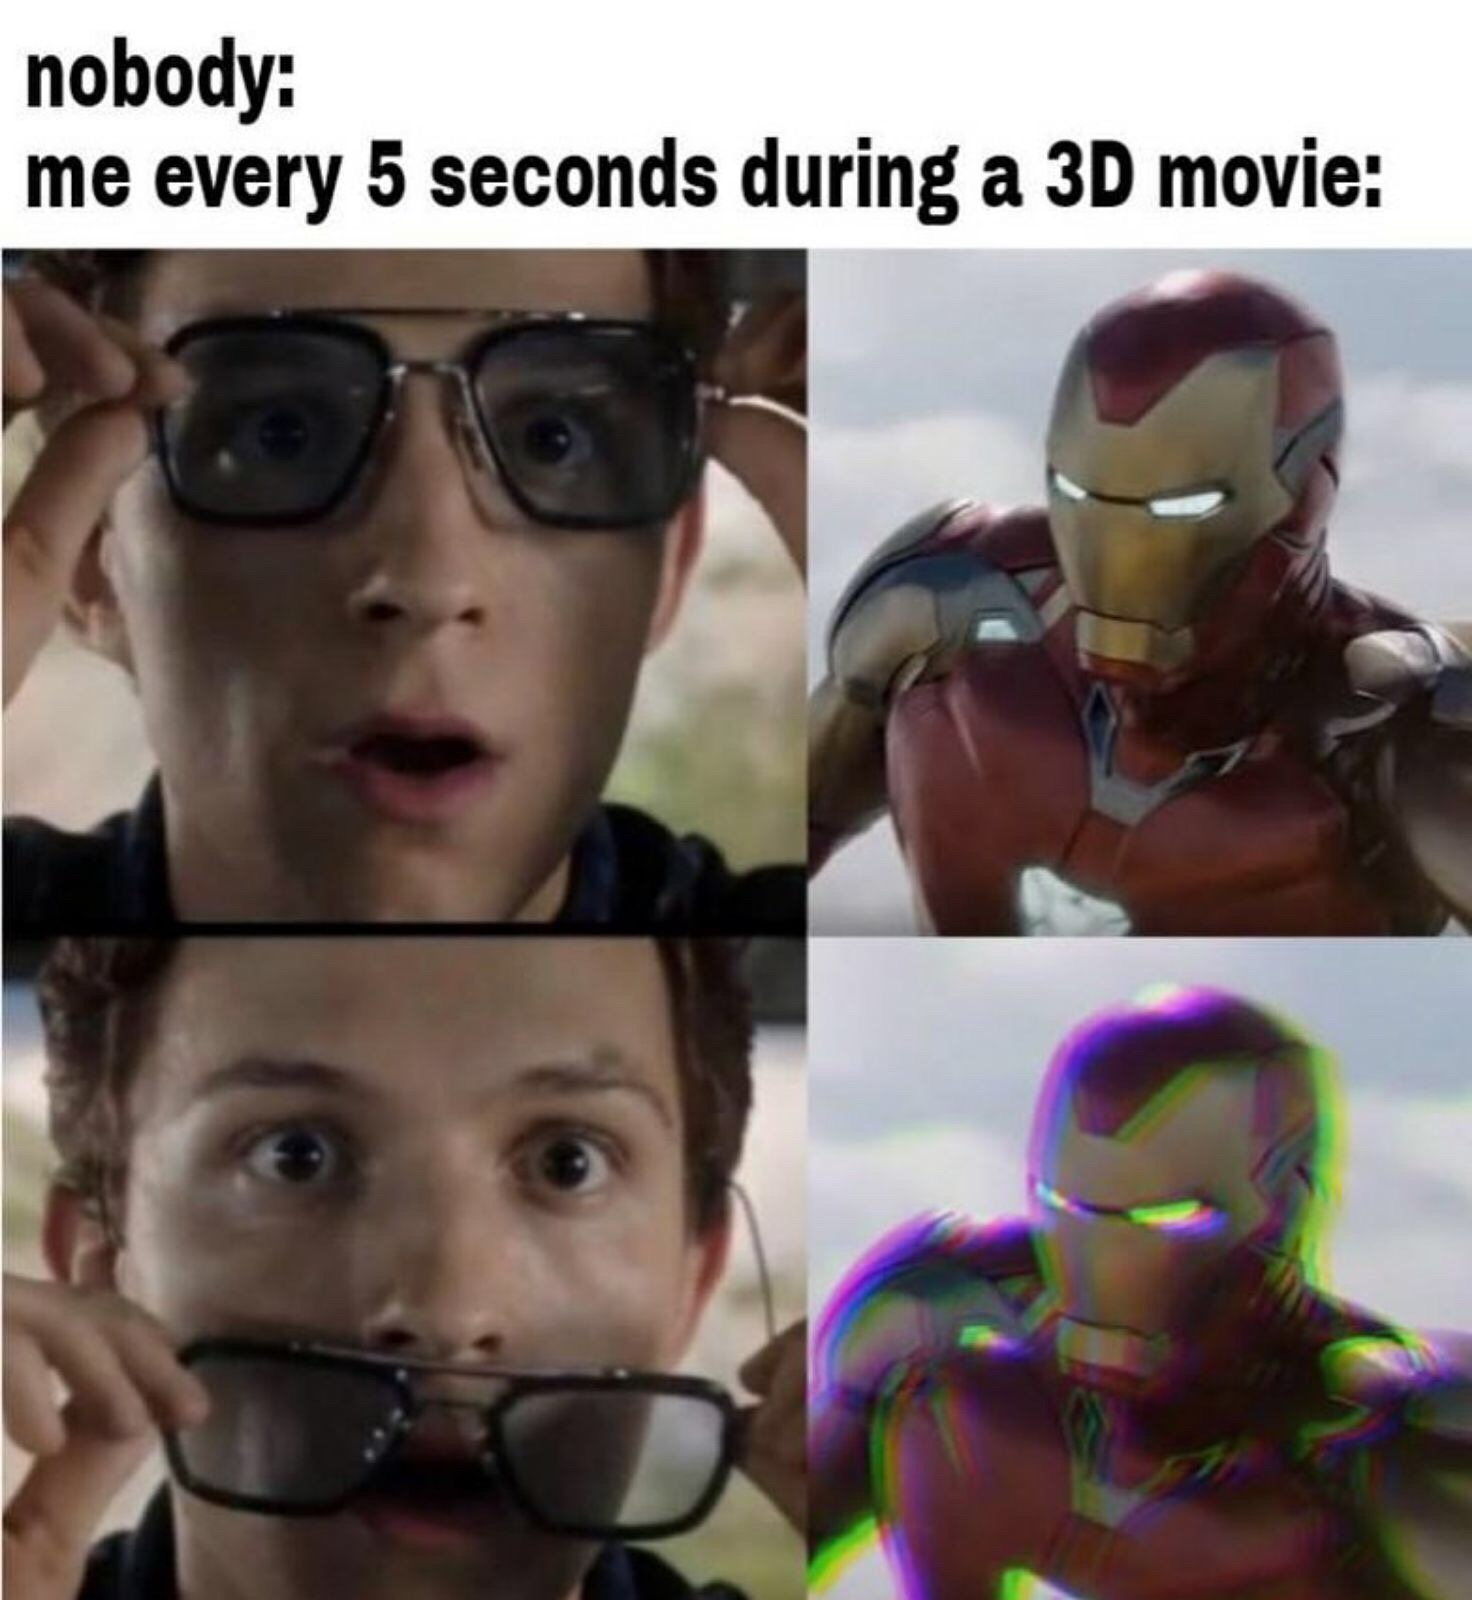 why are we so into 3D movies - meme